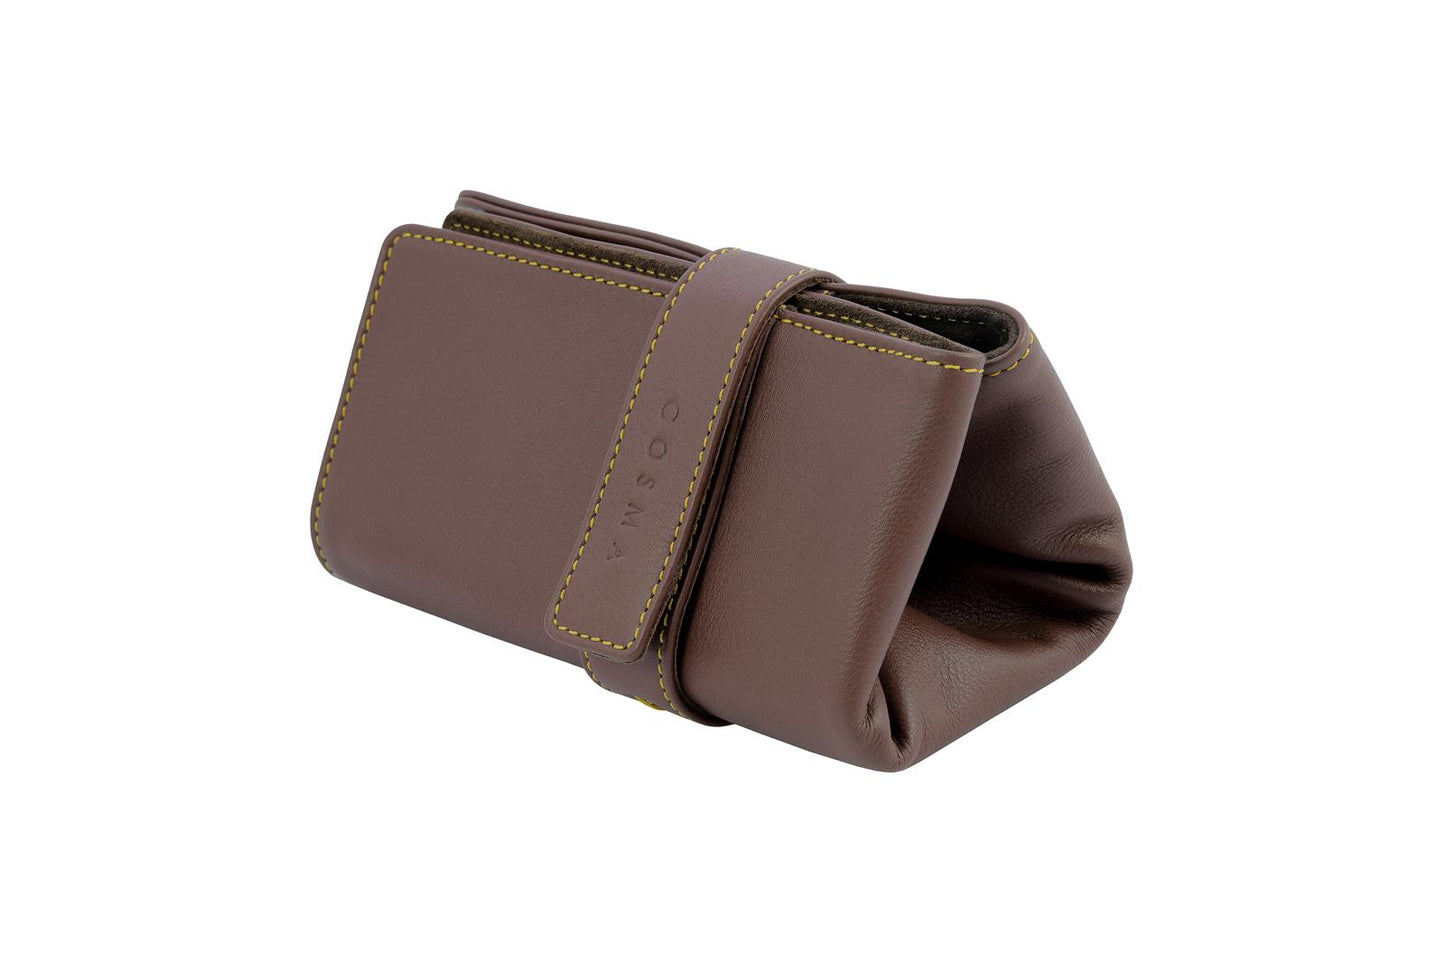 Leather Watch Pouch for 3 watches - Dark Brown / Chocolate